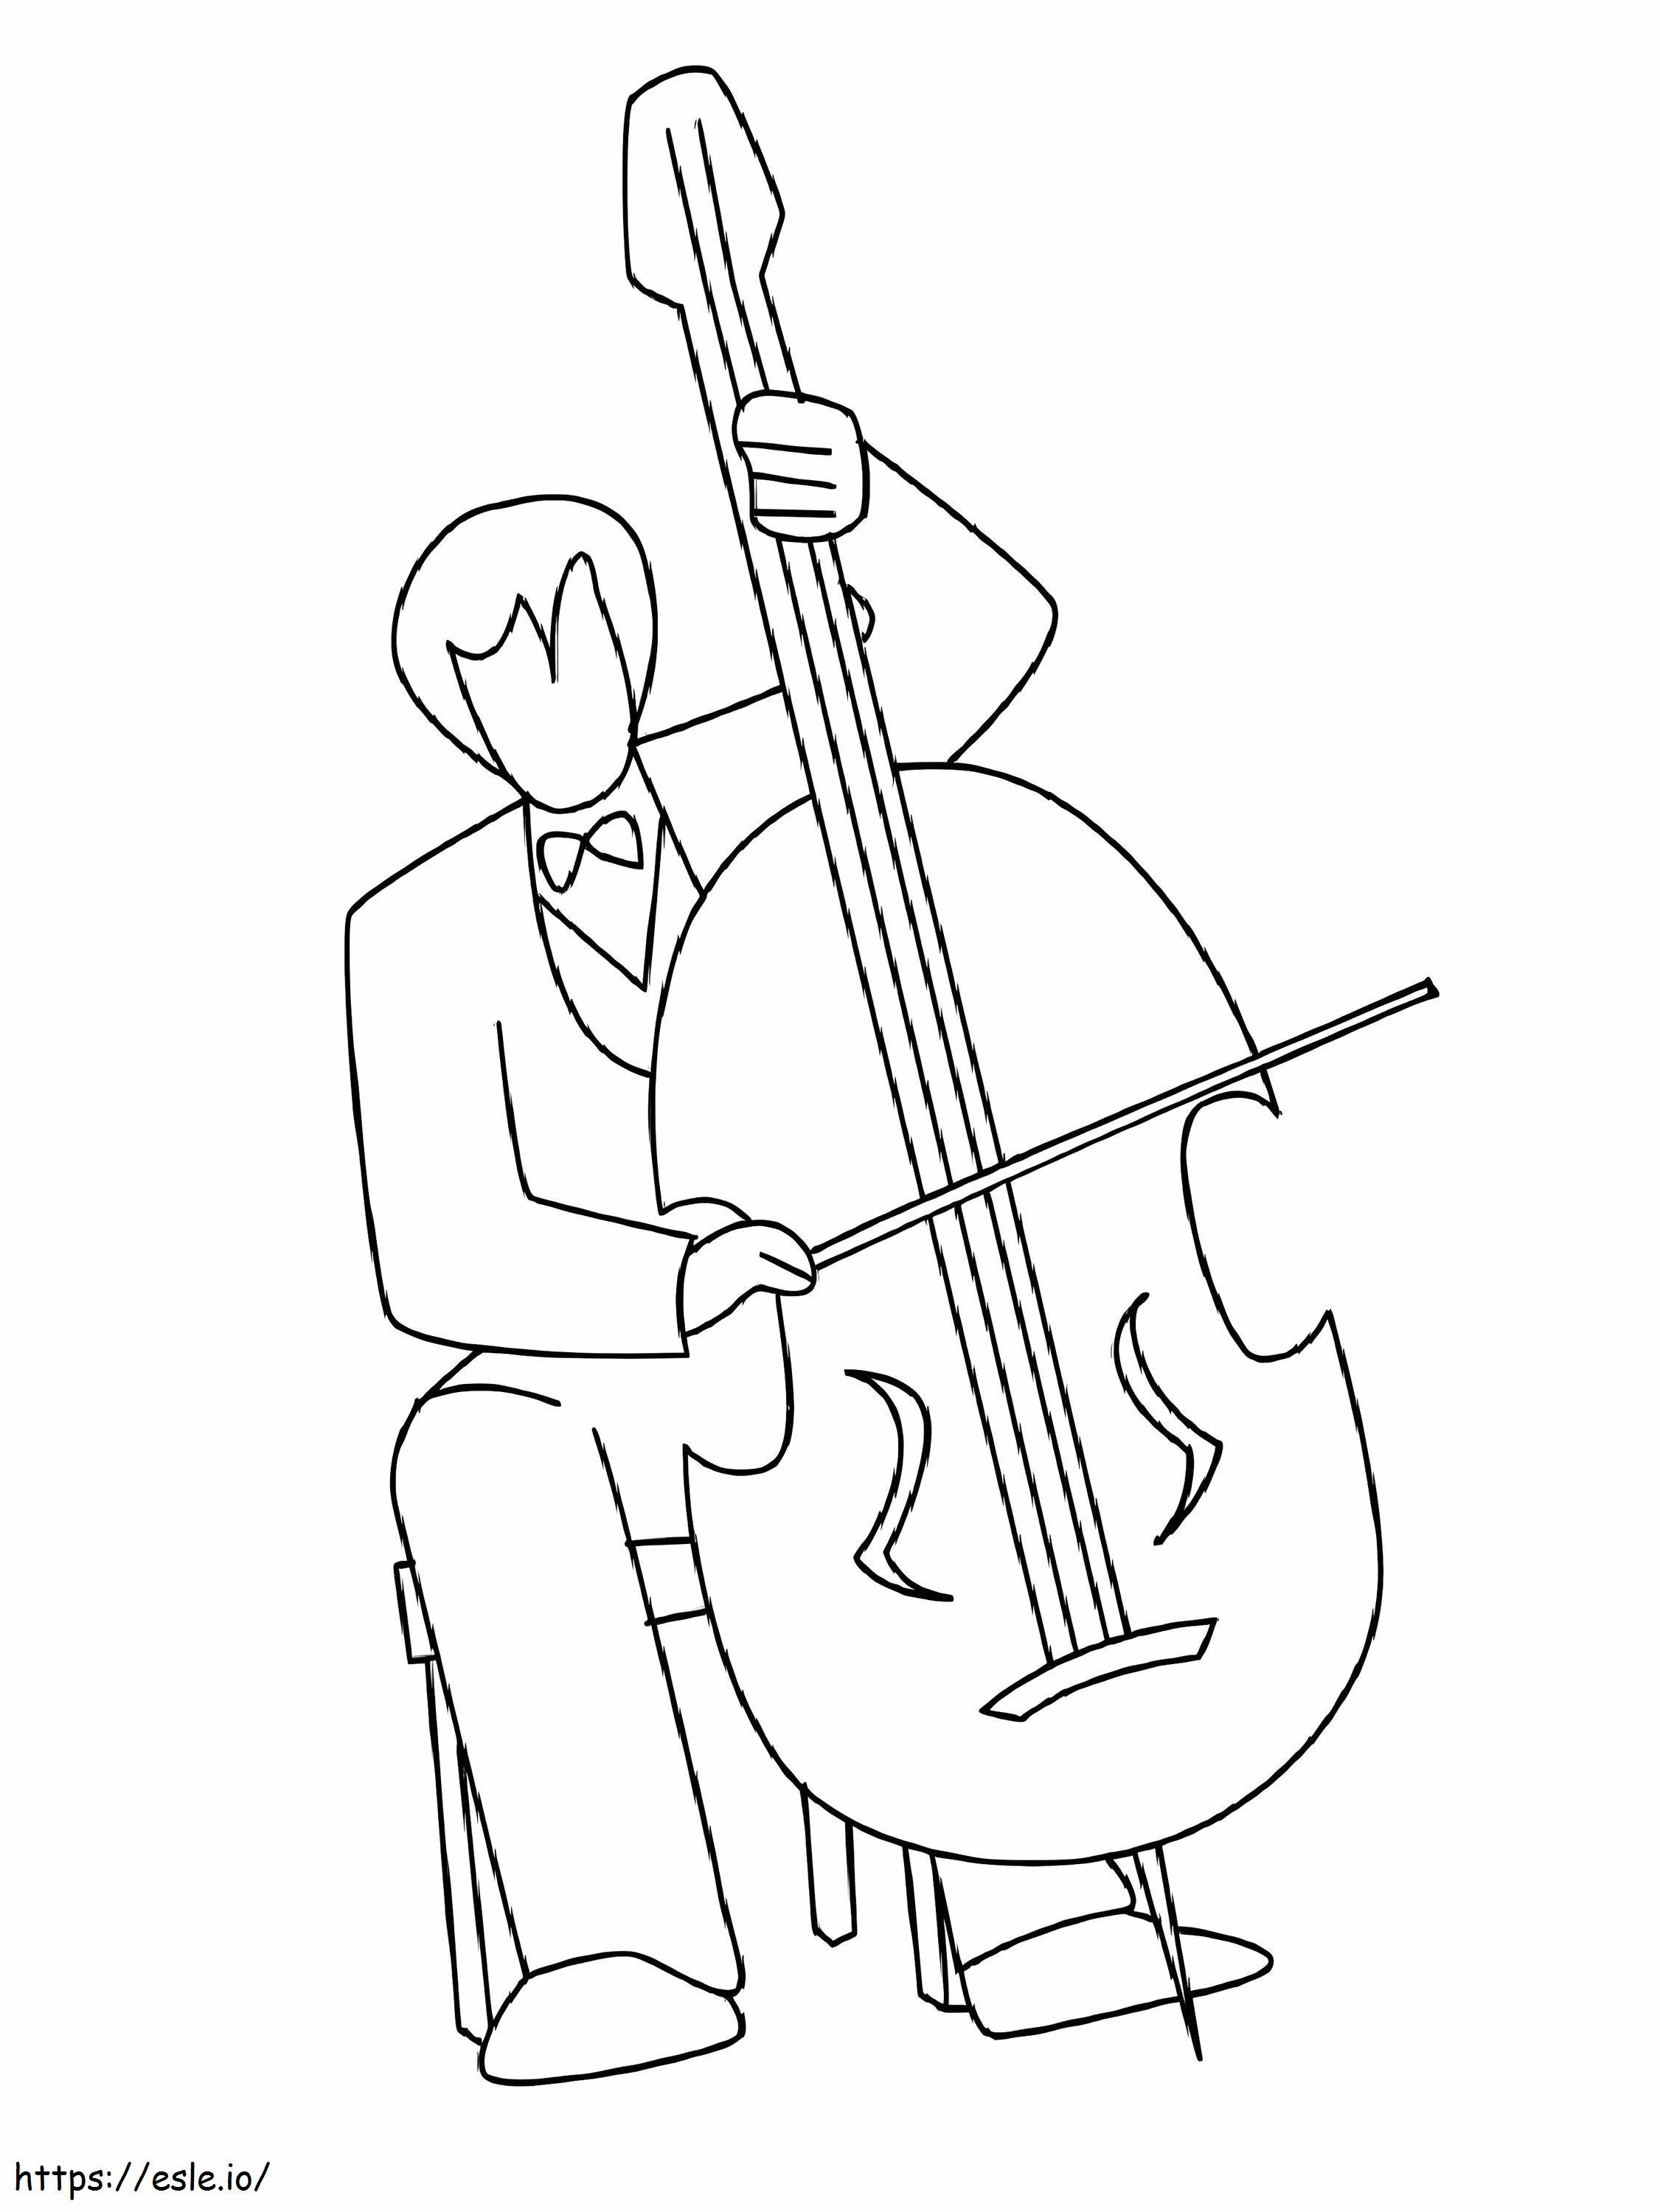 Playing Cello coloring page